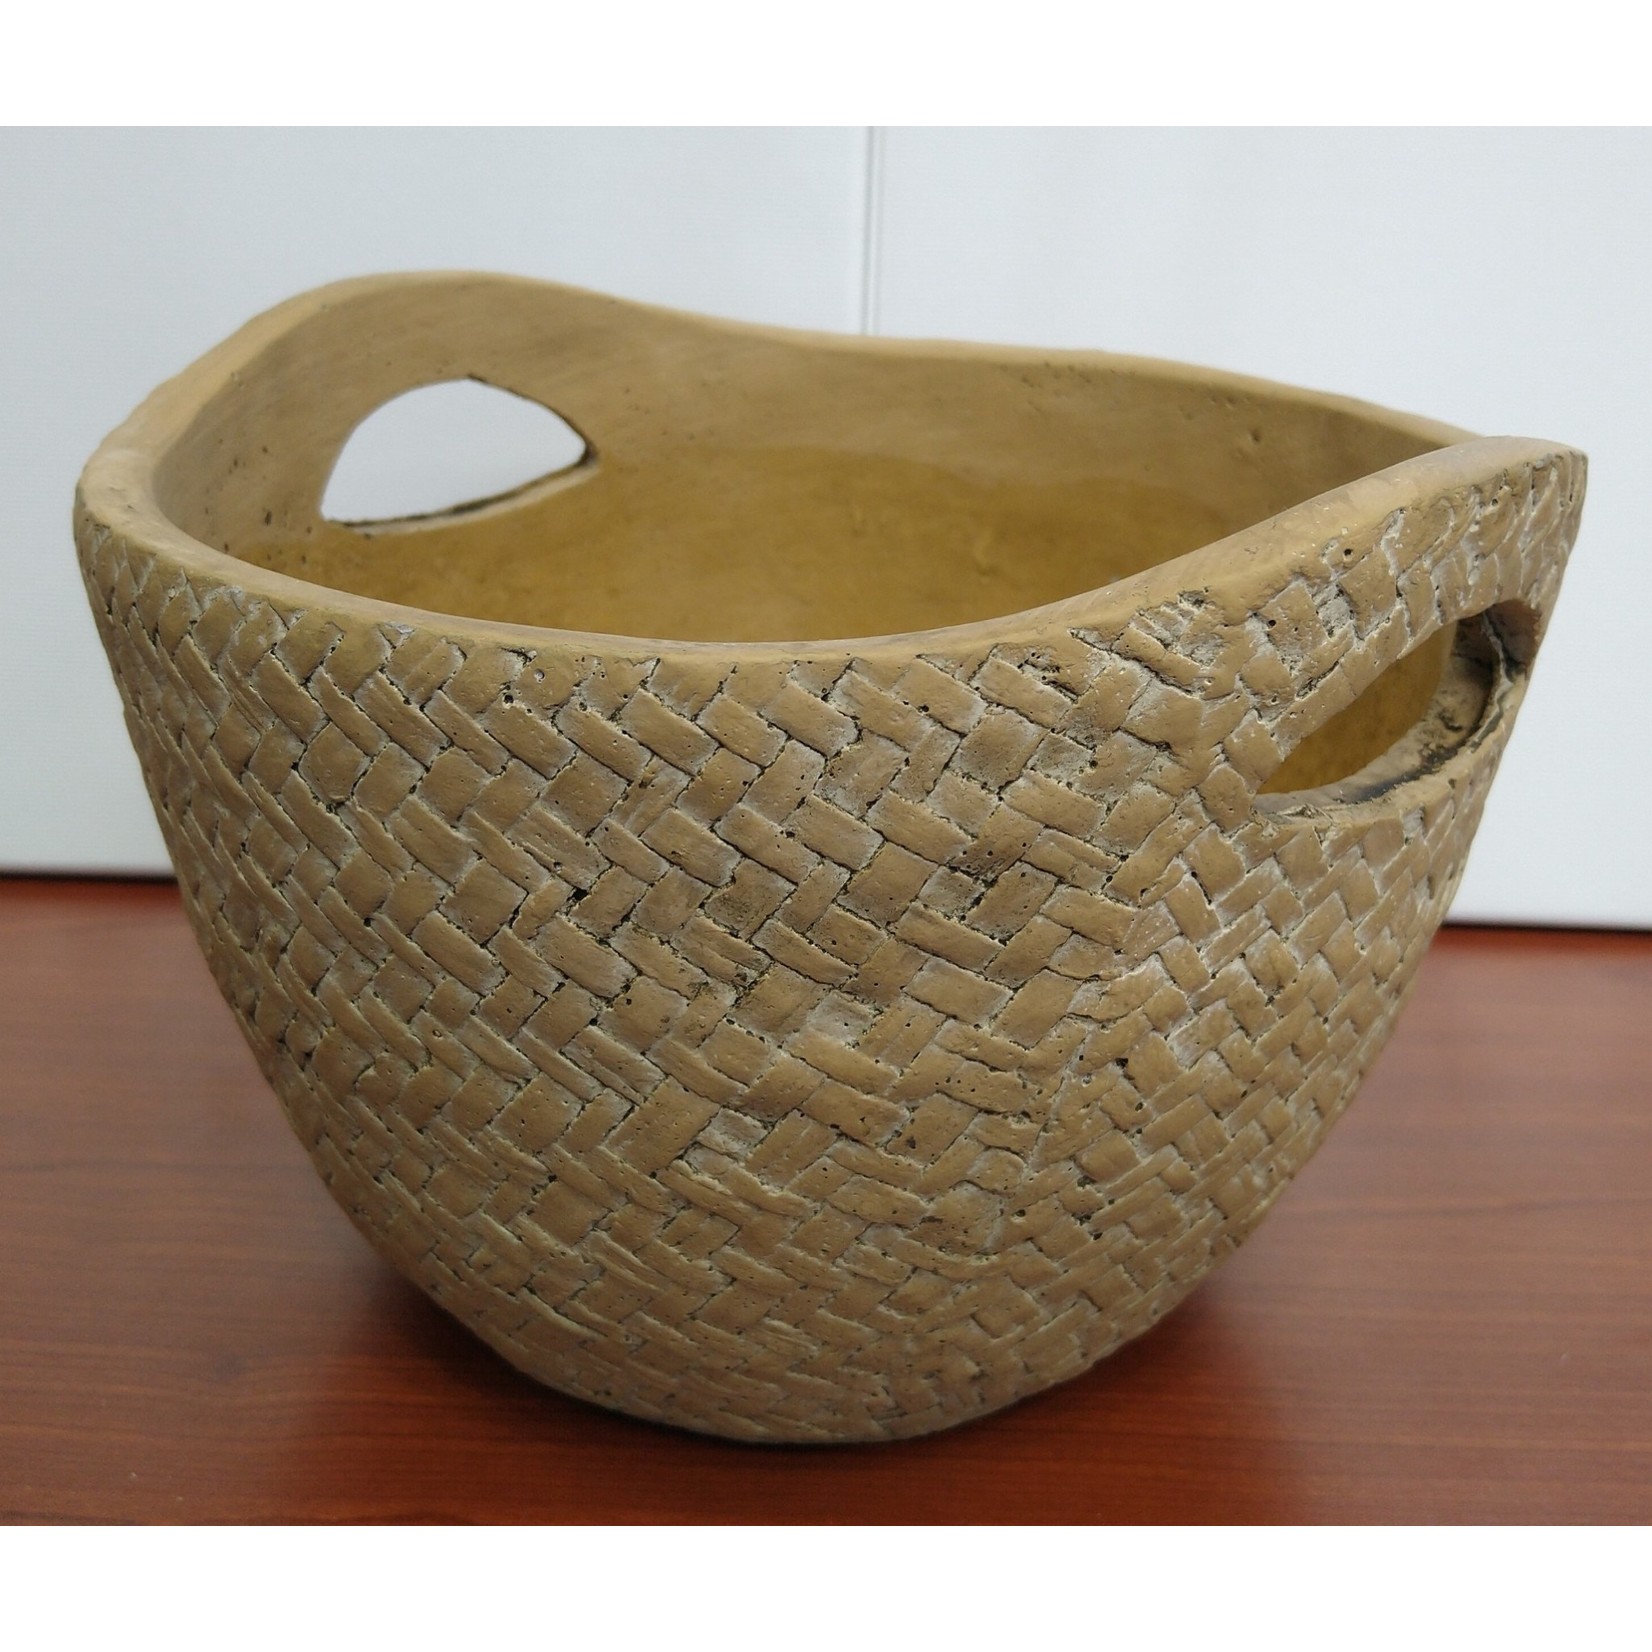 Napa Home and Garden Basket Weave Pot Large 9x6.25